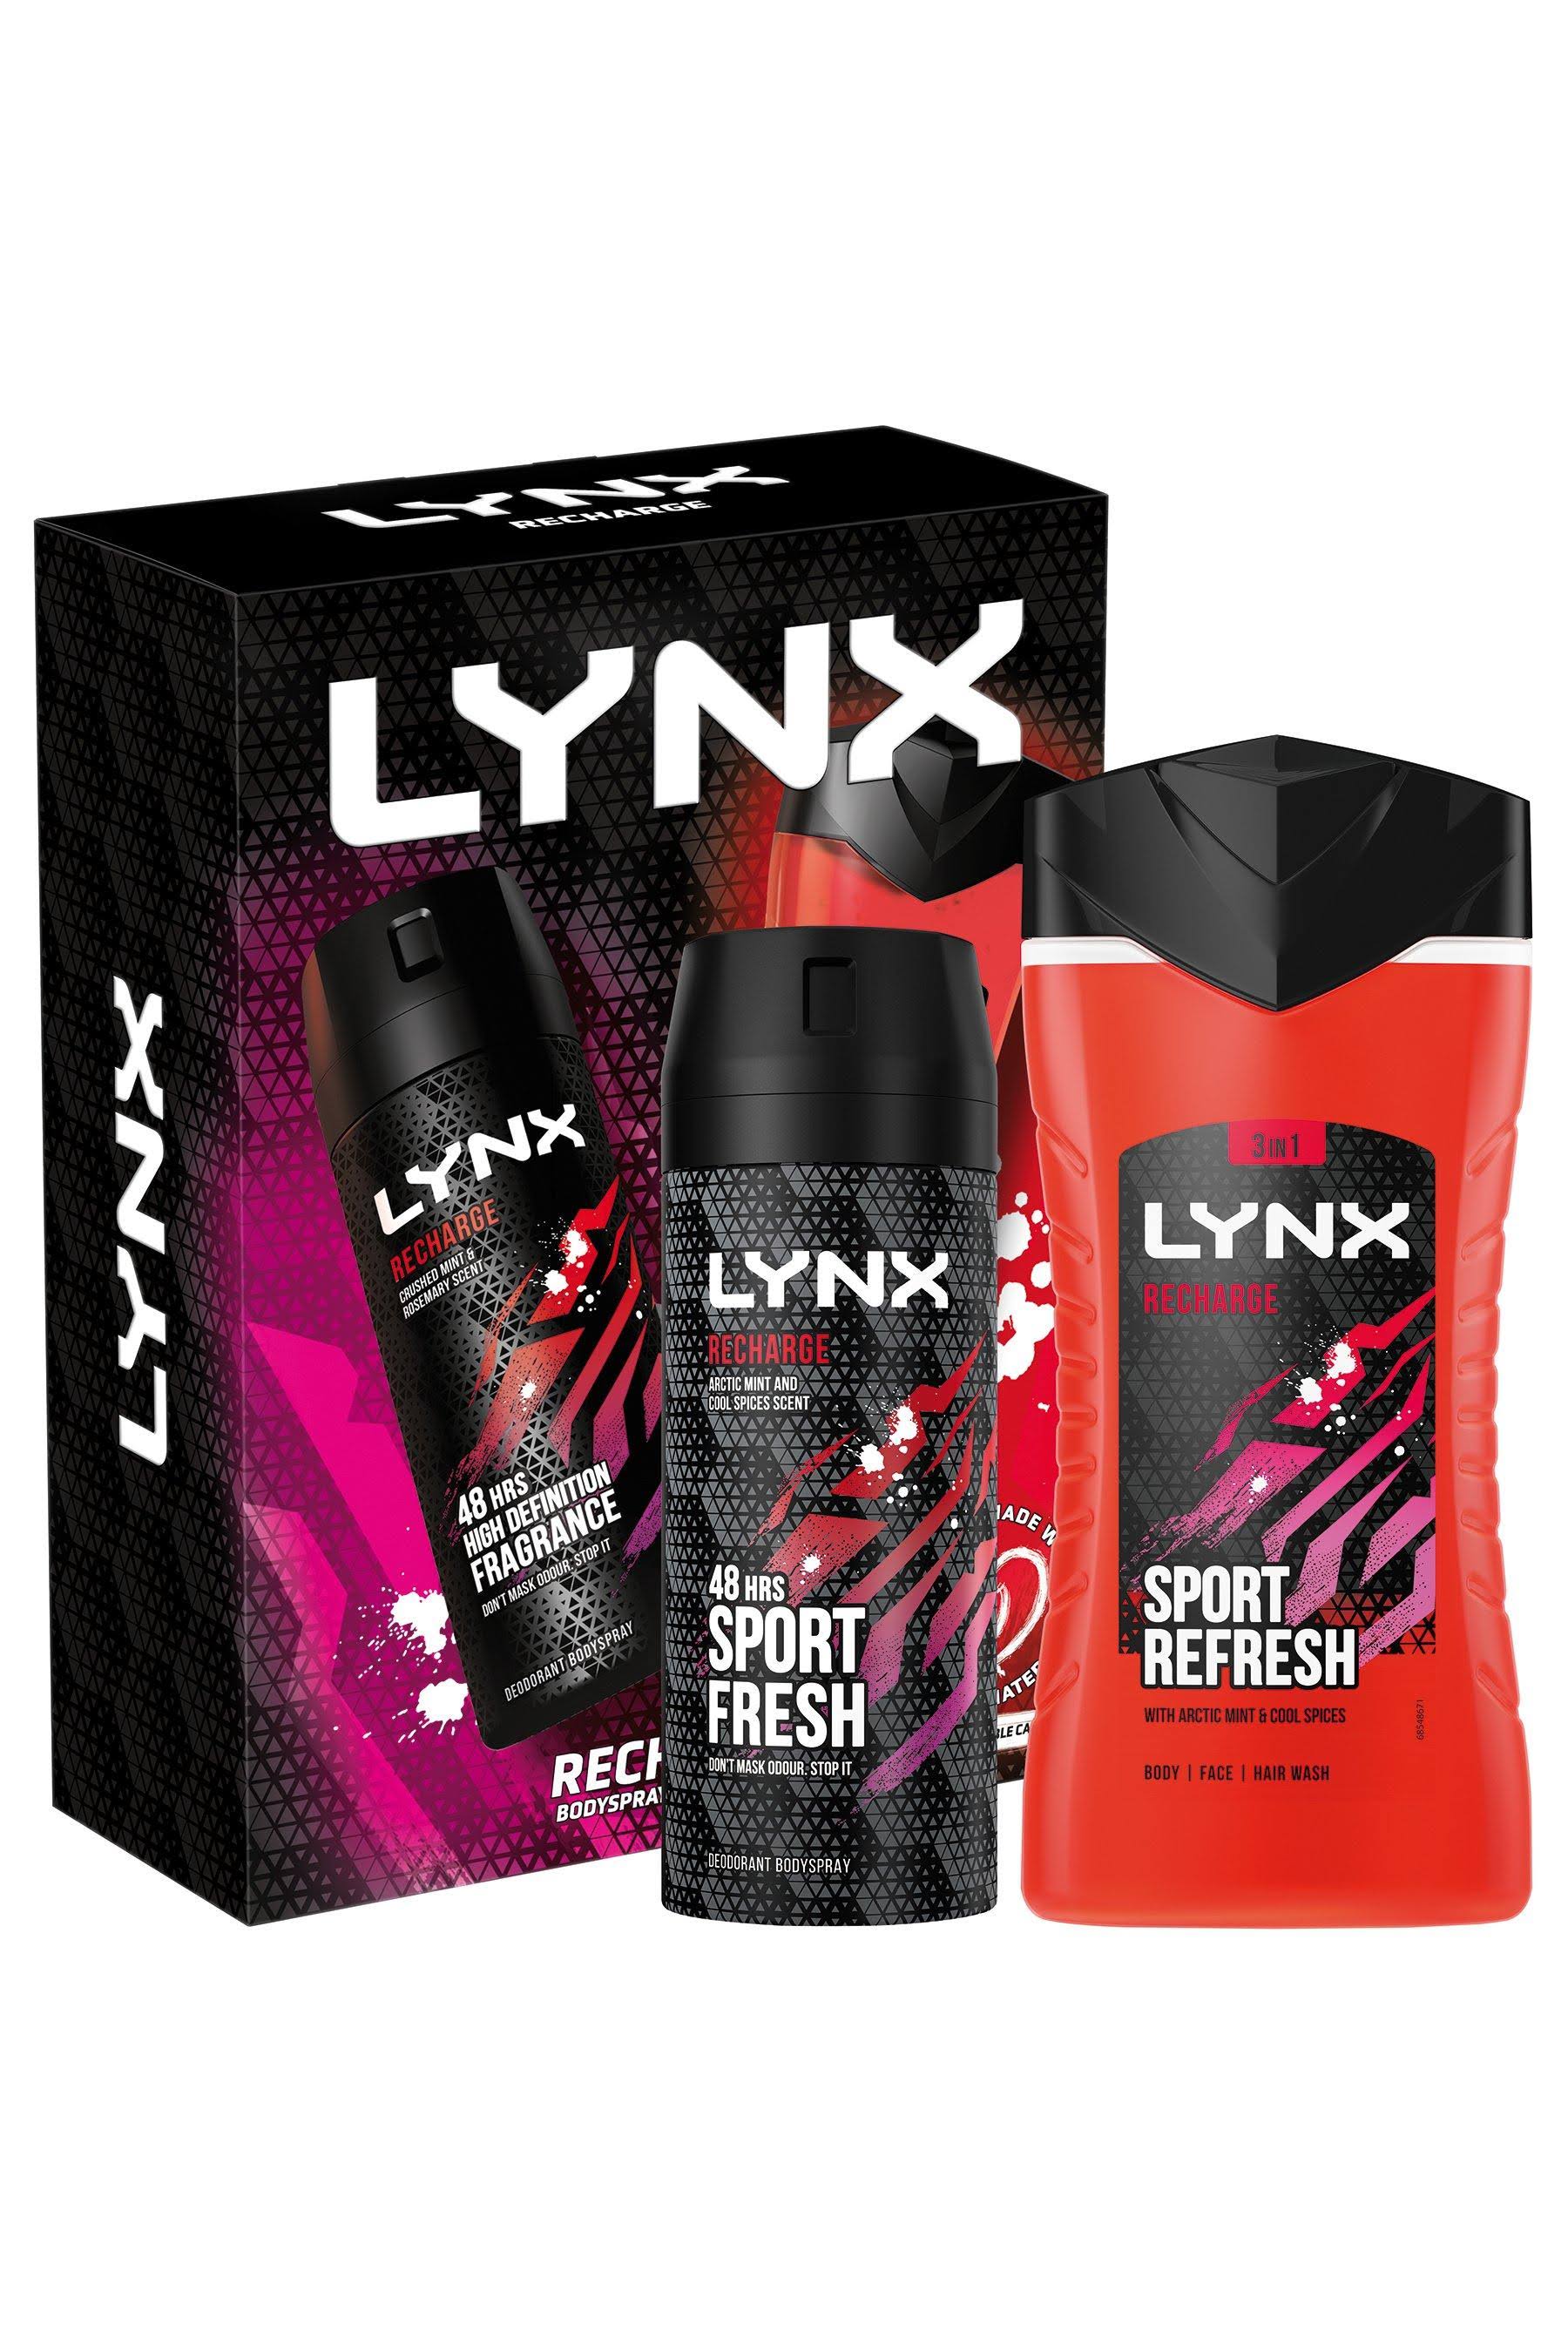 Lynx Recharge Duo Giftset by dpharmacy